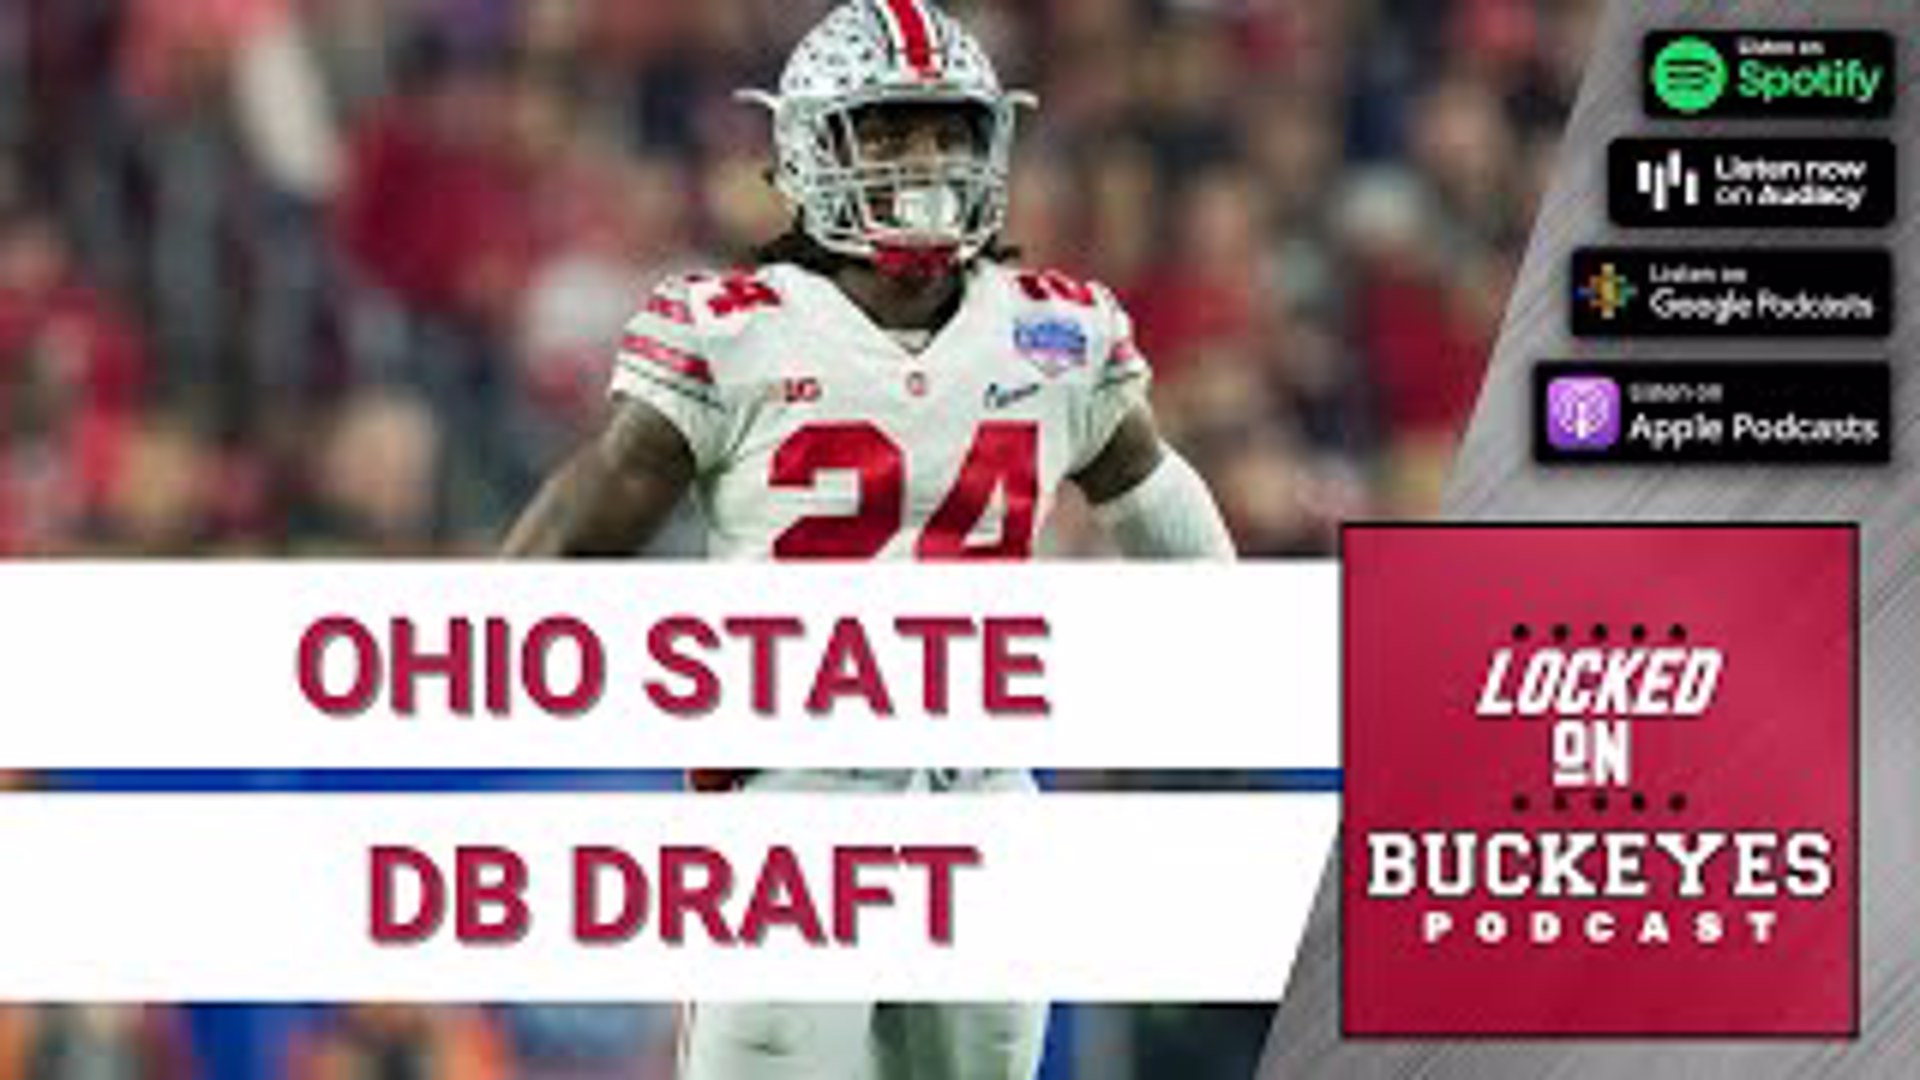 Jay and Cory go back and forth in a 3-round draft as they draft the best Ohio State defensive backs over the past 20 years.